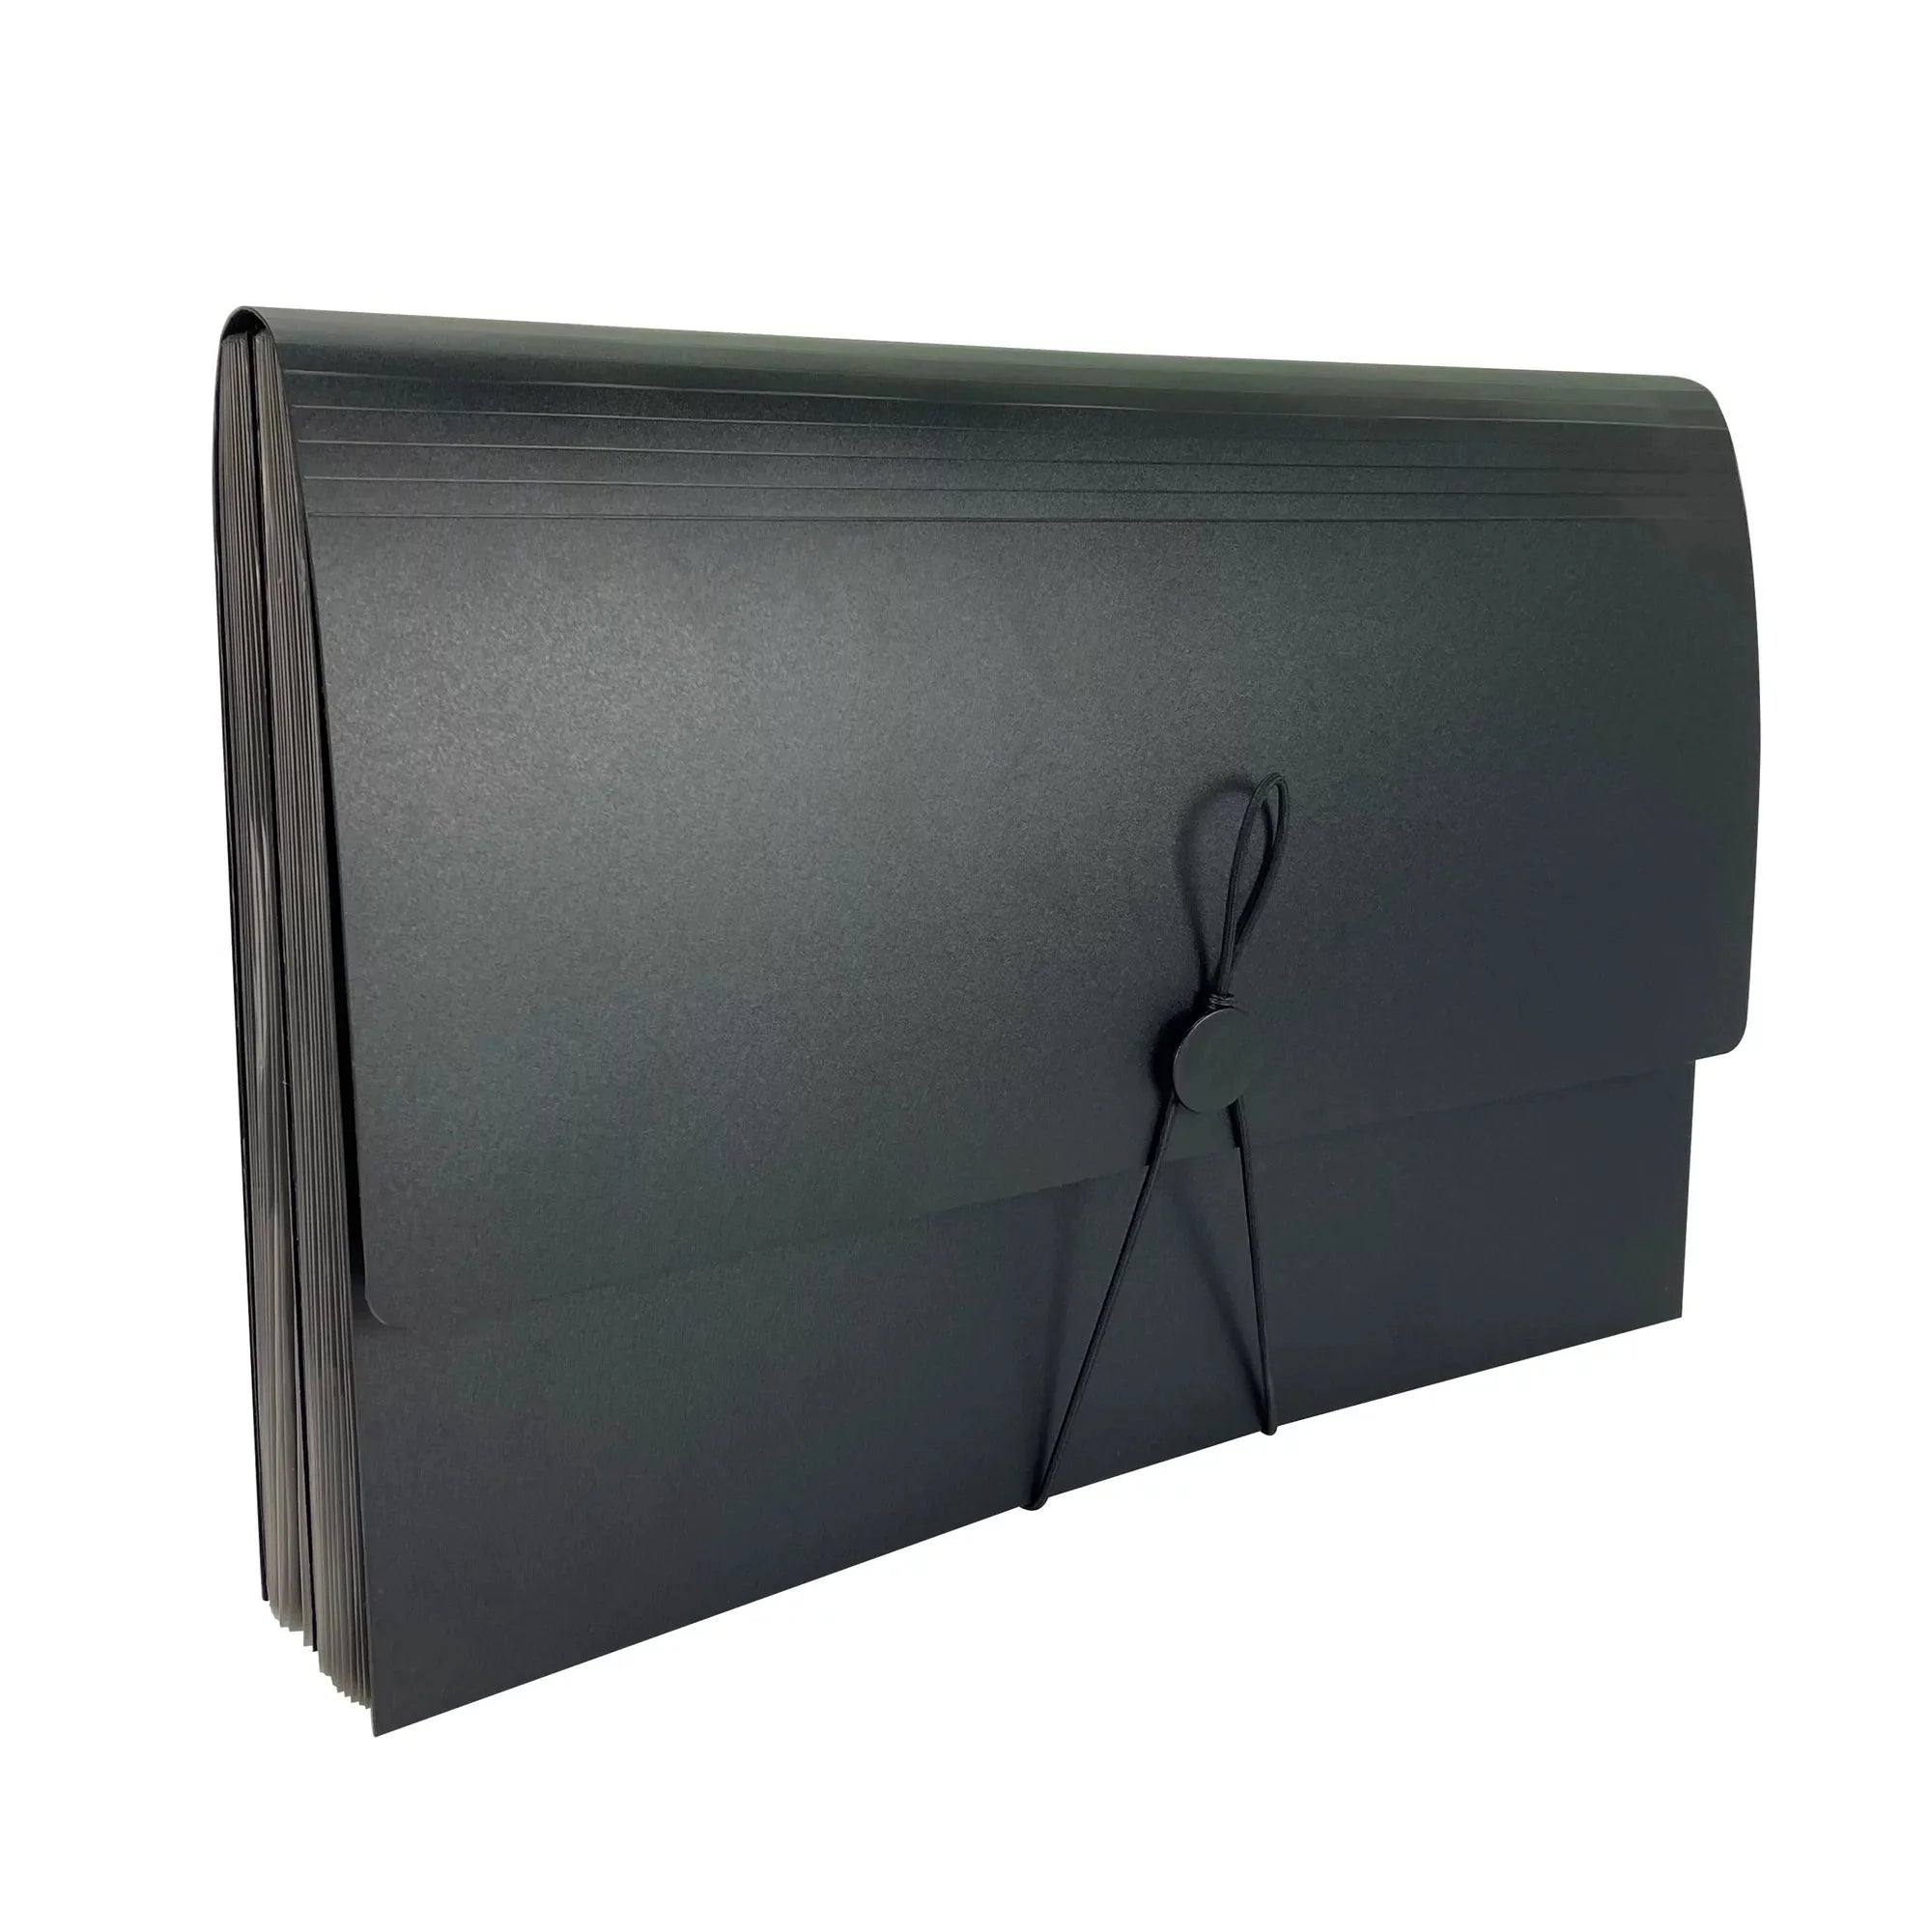 Wholesale prices with free shipping all over United States Pen+Gear 24-Pocket Poly Expanding File Organizer, Black File Folders - Steven Deals